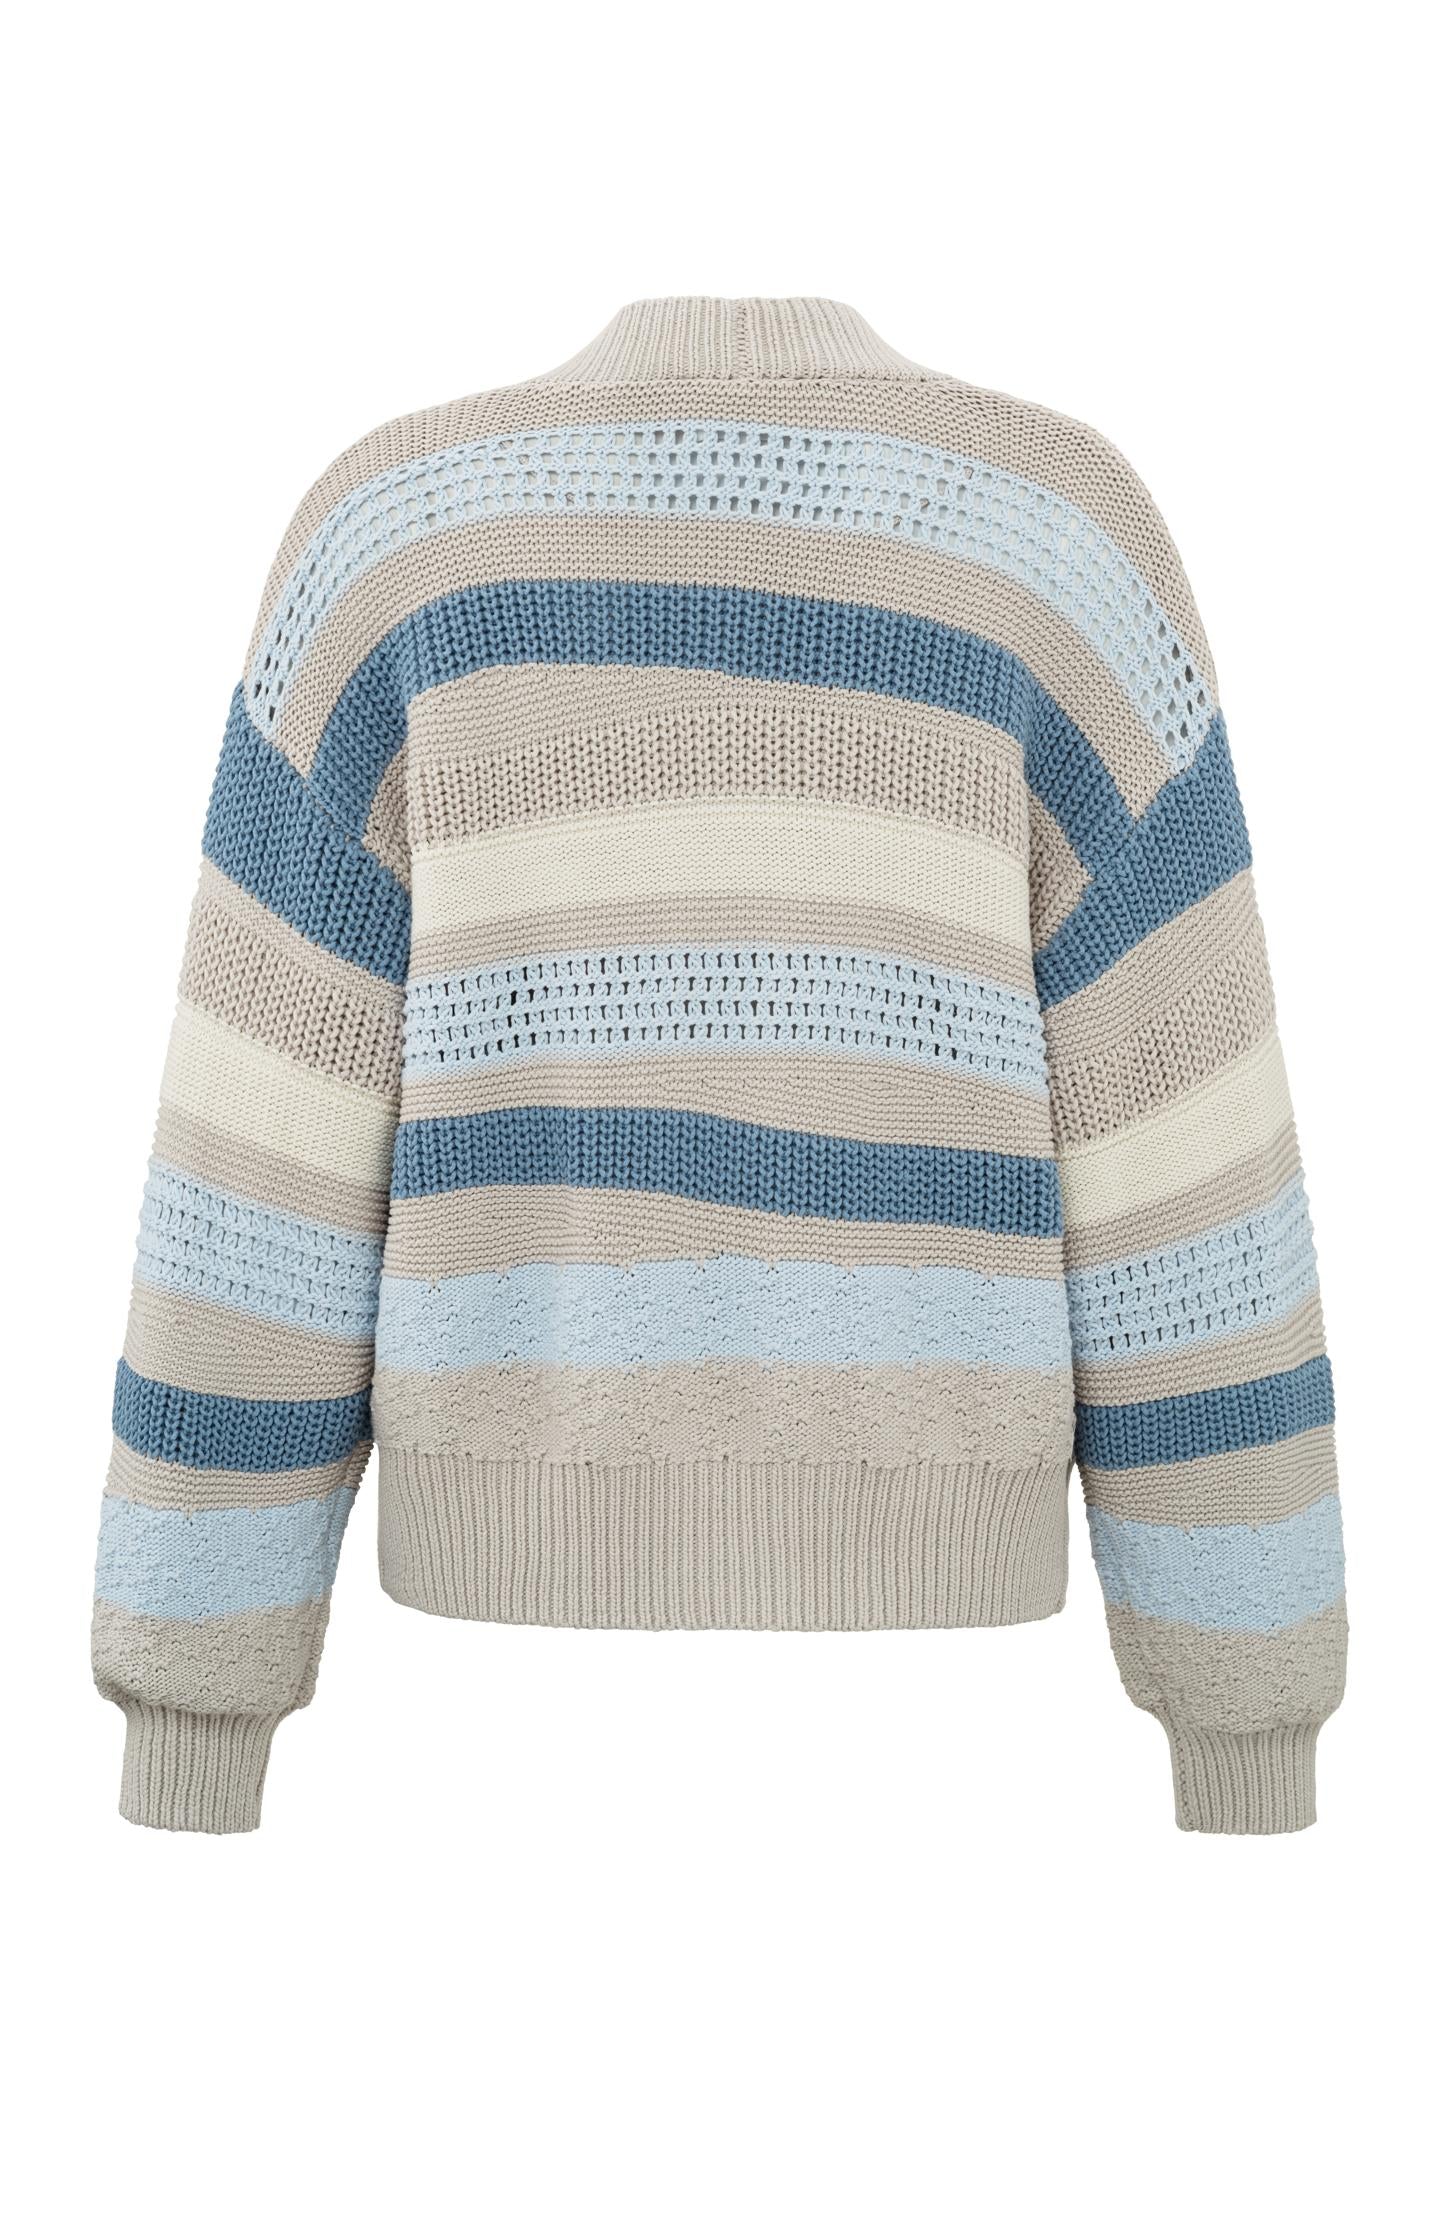 Textured cardigan with long sleeves and knitted stripes